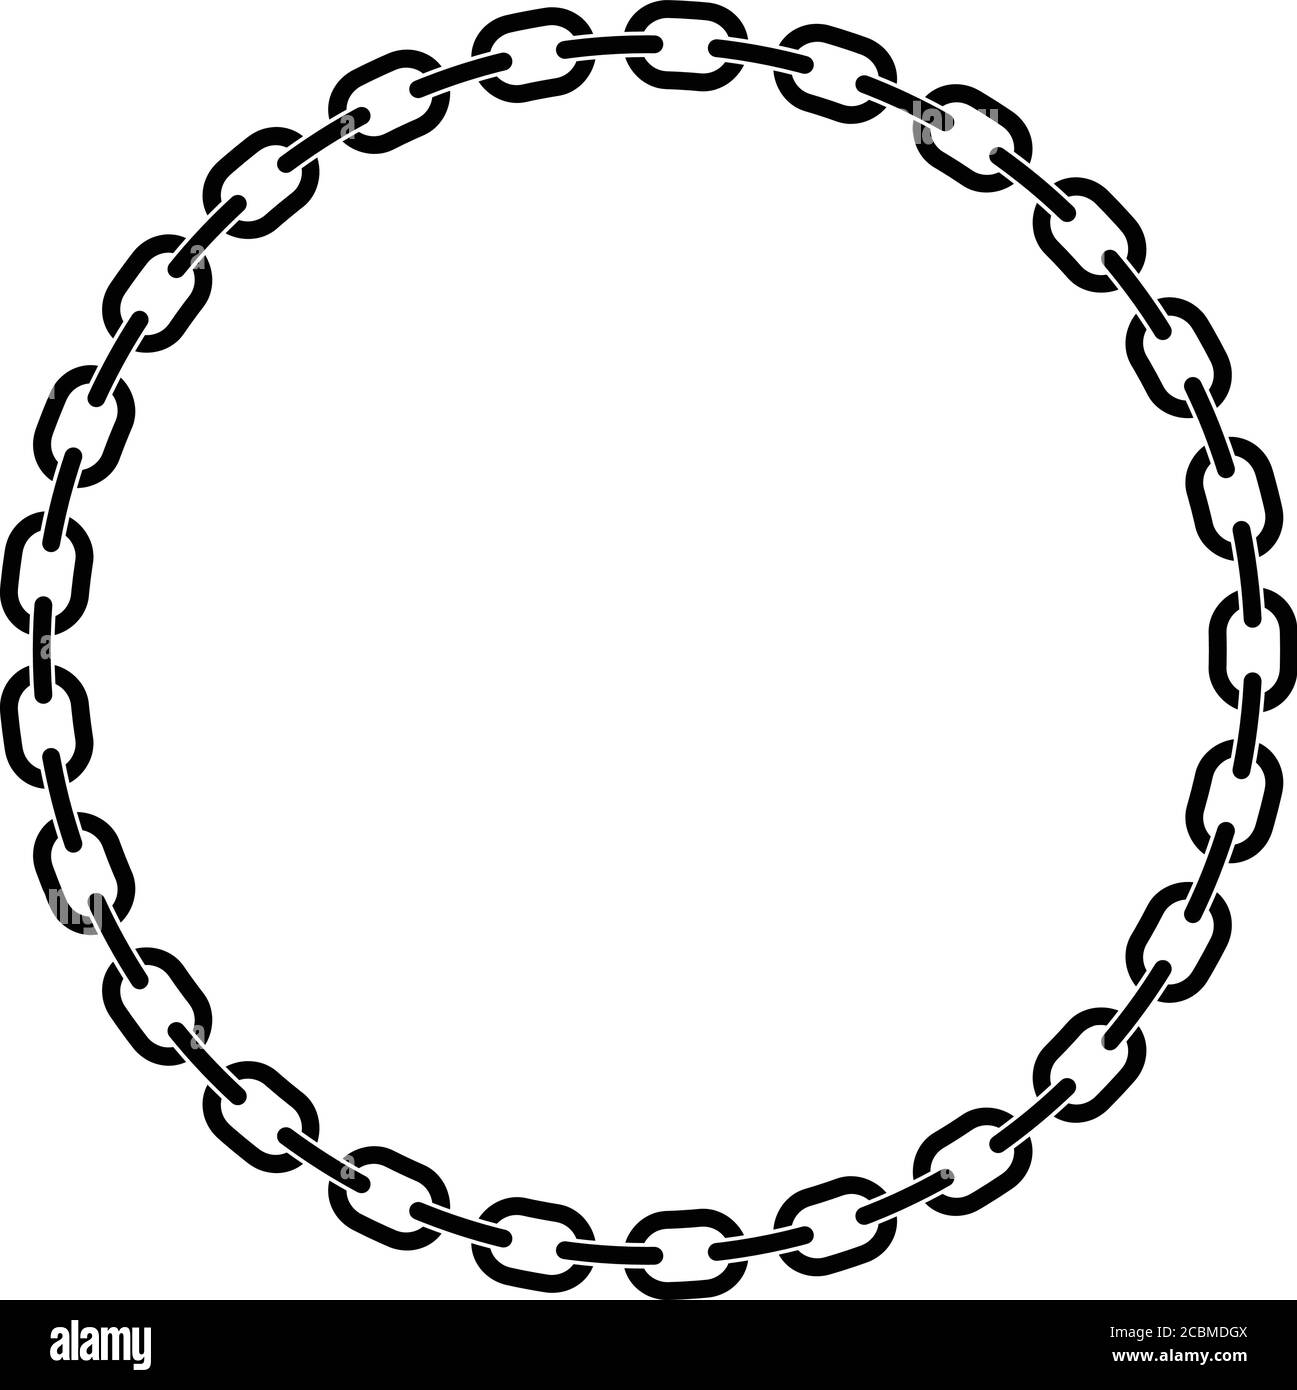 Chain Links in a Prefect Circle Isolated Vector Illustration Stock Vector